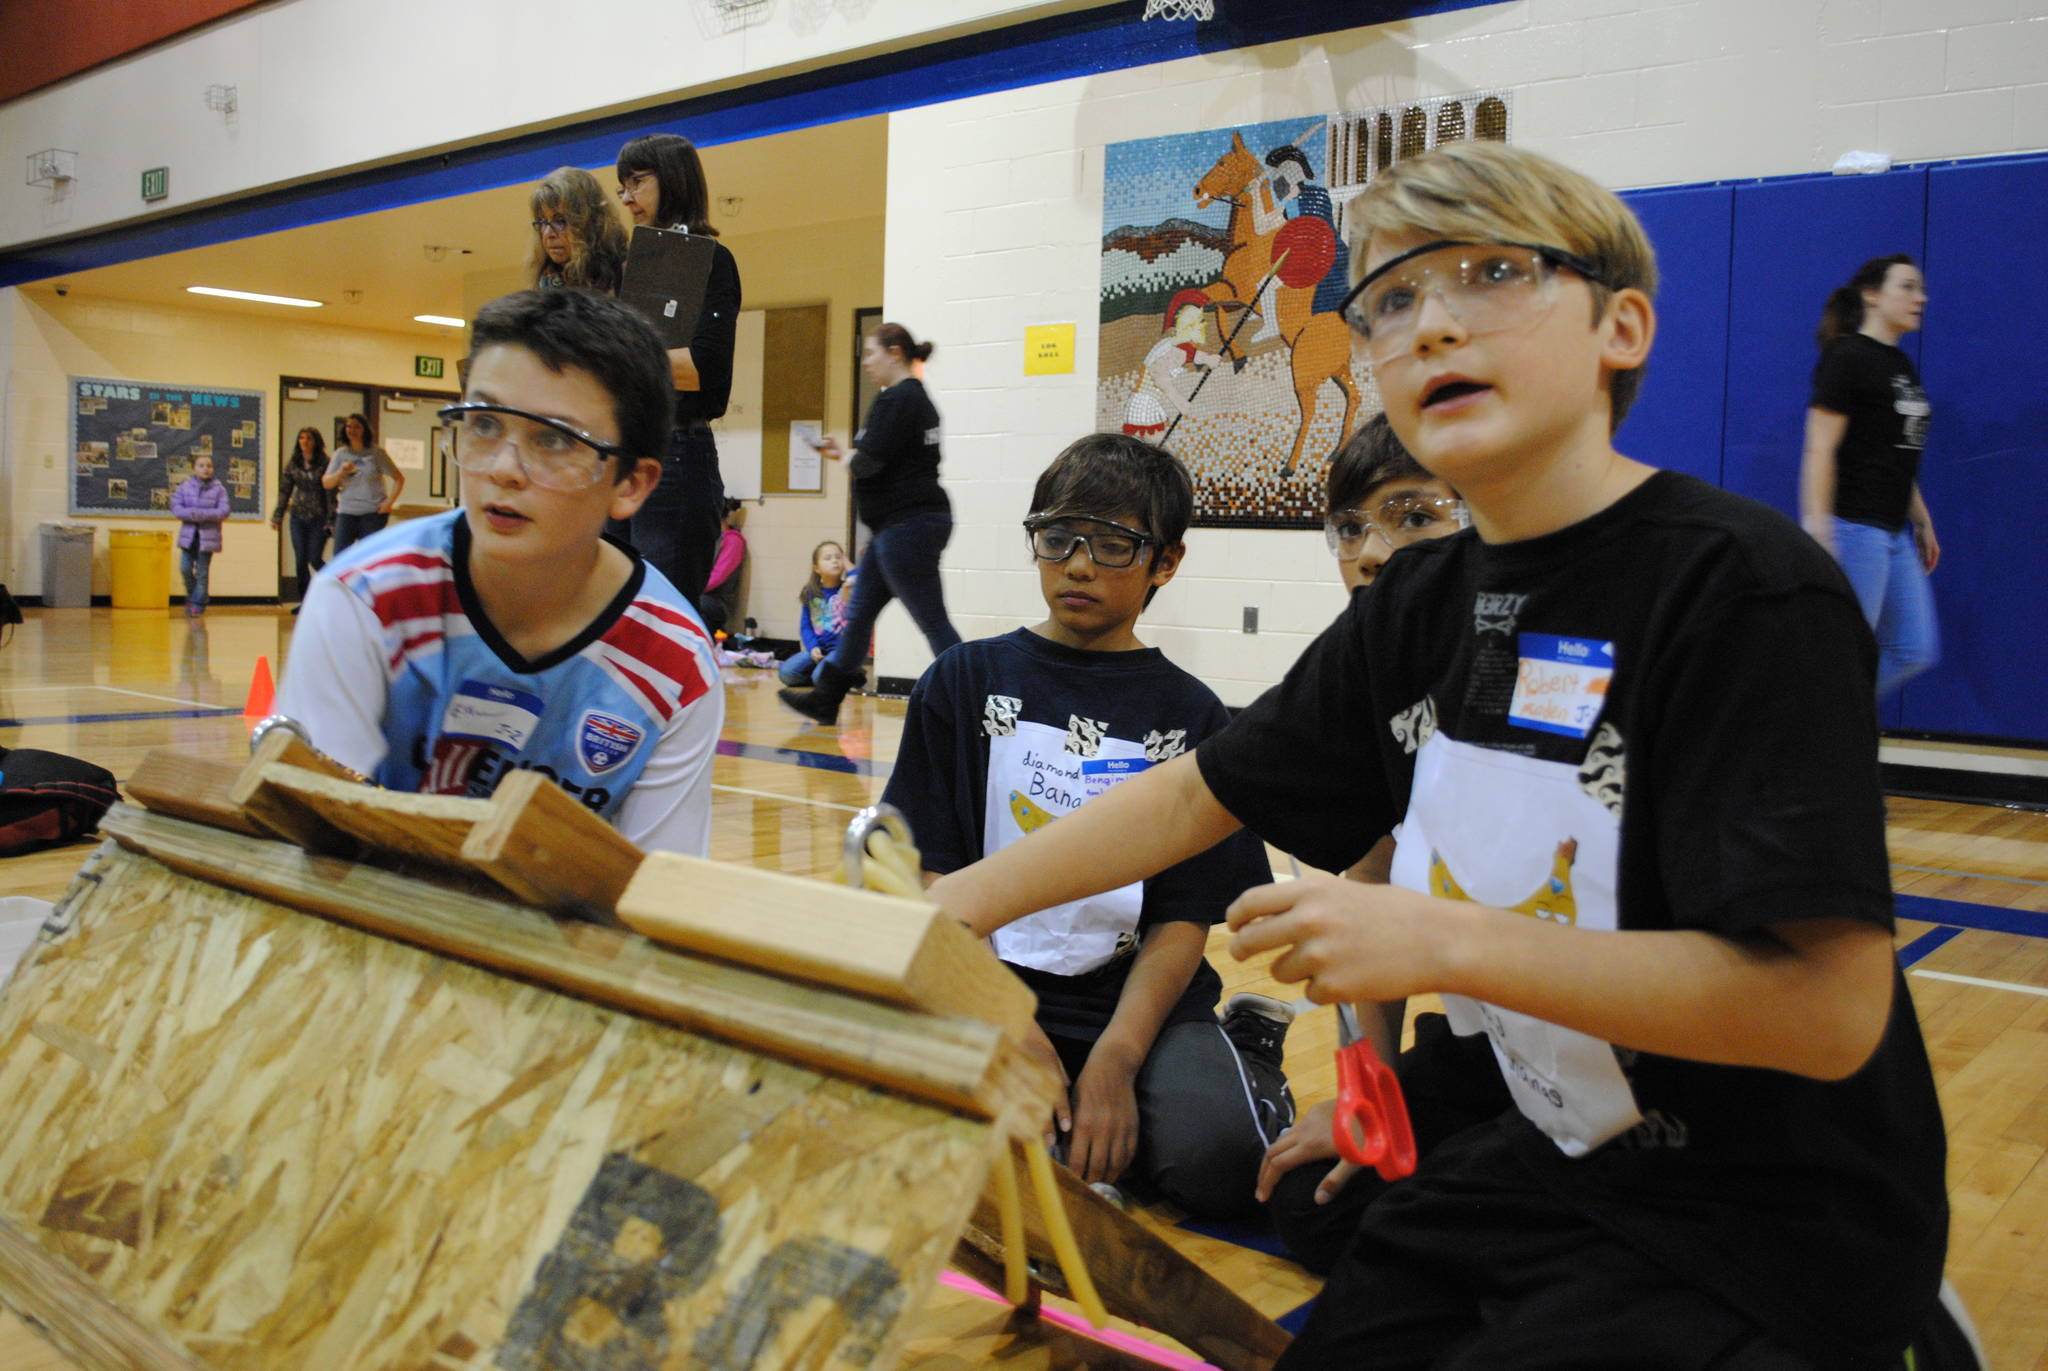 The Diamond Bananas, also known as Ethan Williams, left, Bengimin Ambrosian, Nickolas Ambrosian and Robert Minden of Seward Middle School, prepare their catapult for the Mind A-Mazes challenge at Soldotna Prep School in Soldotna, Alaska on Saturday, October 14, 2017. Their device had to shoot a rubber ball into a wastebasket from different distances. (Photo by Kat Sorensen/Peninsula Clarion)